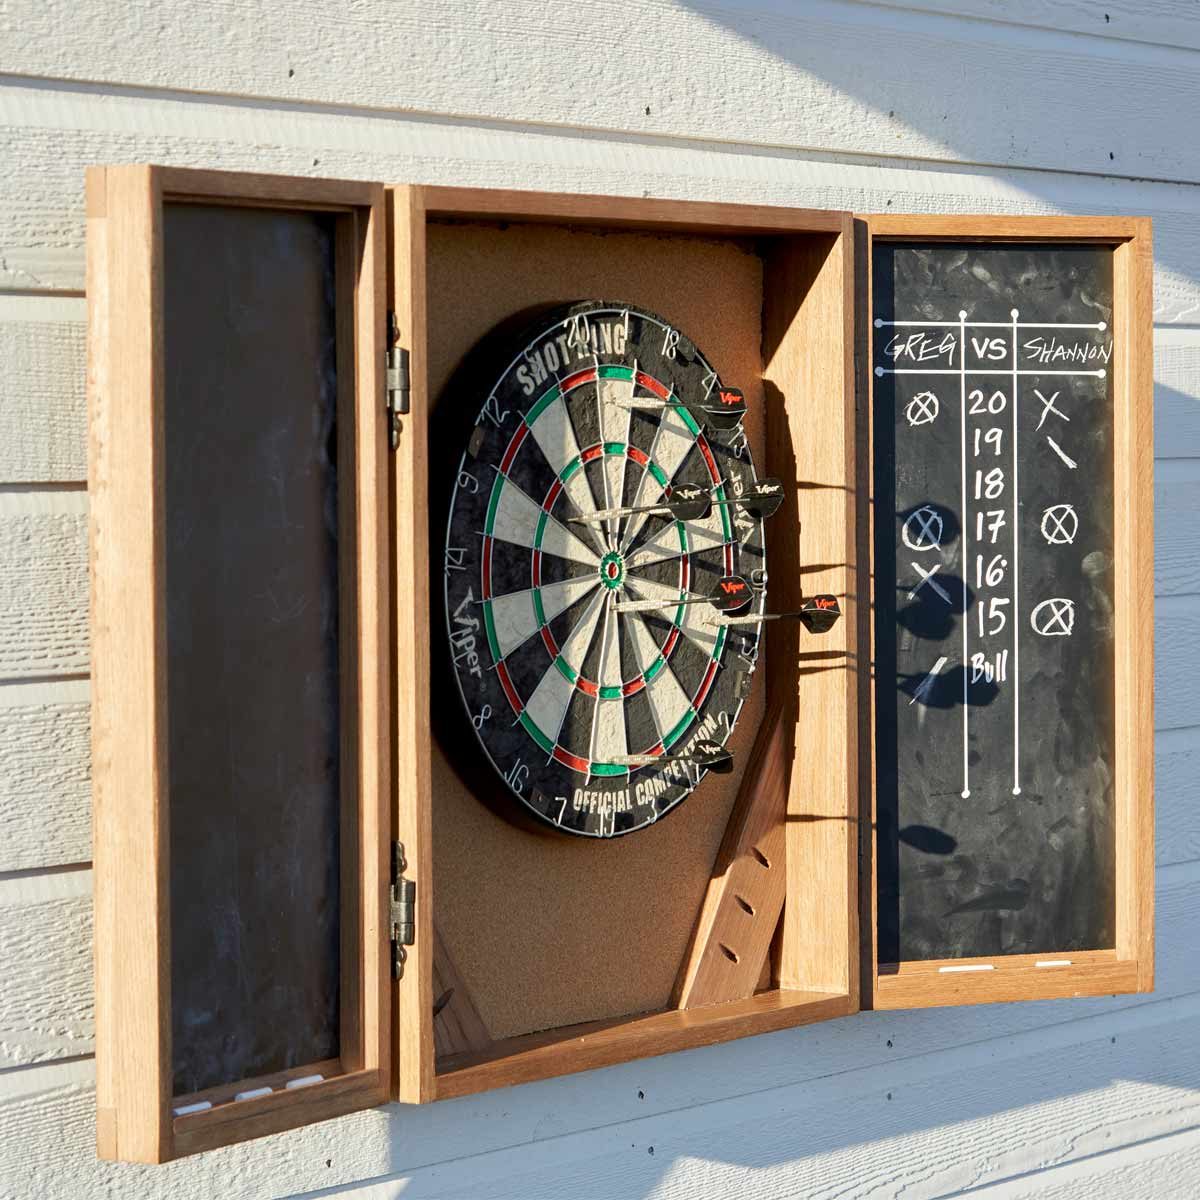 How to Build a Dartboard Cabinet